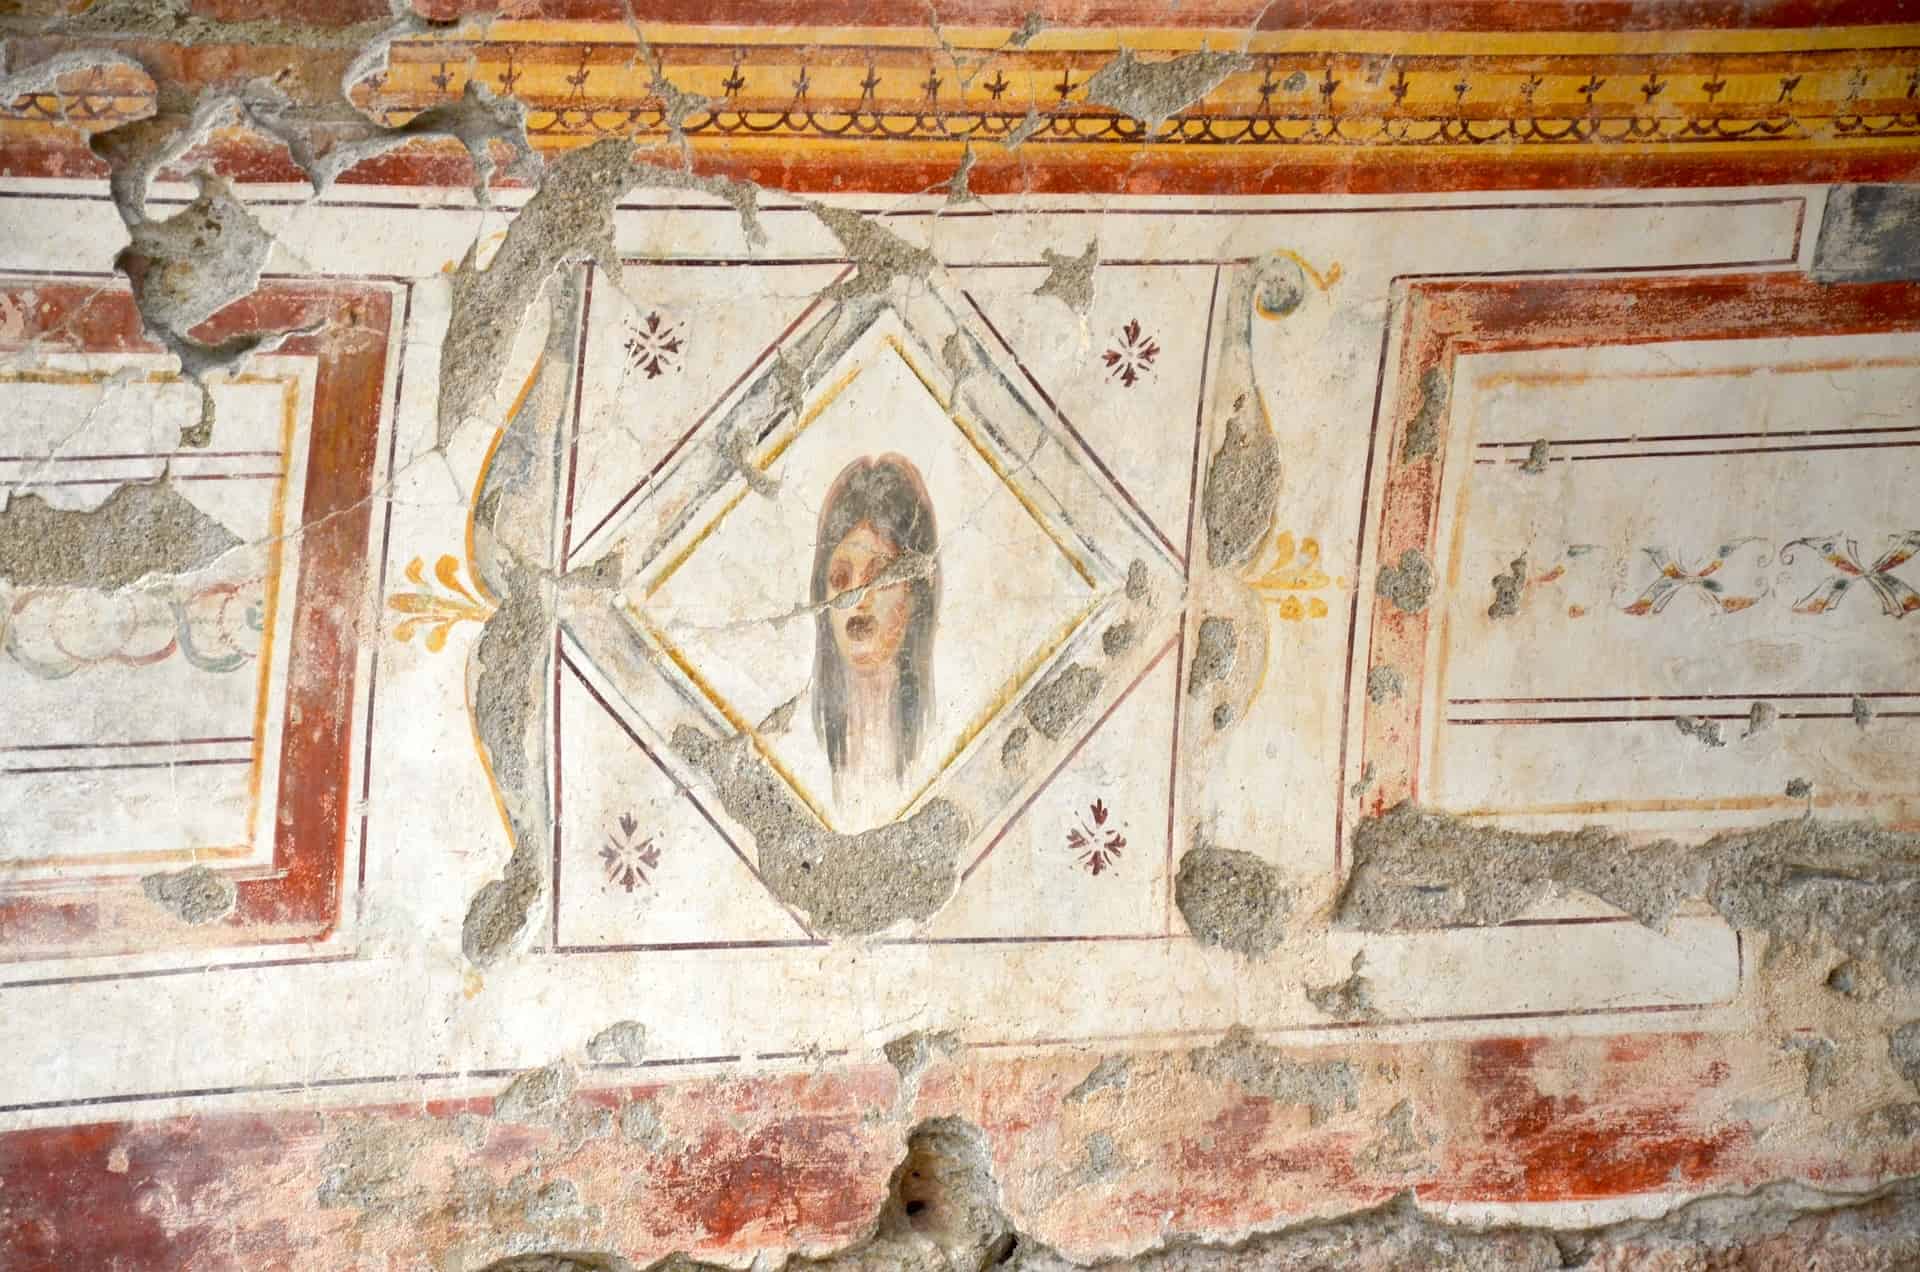 Fresco of a woman's face in the Stucco Room of Dwelling Unit 6 in the Terrace Houses at Ephesus